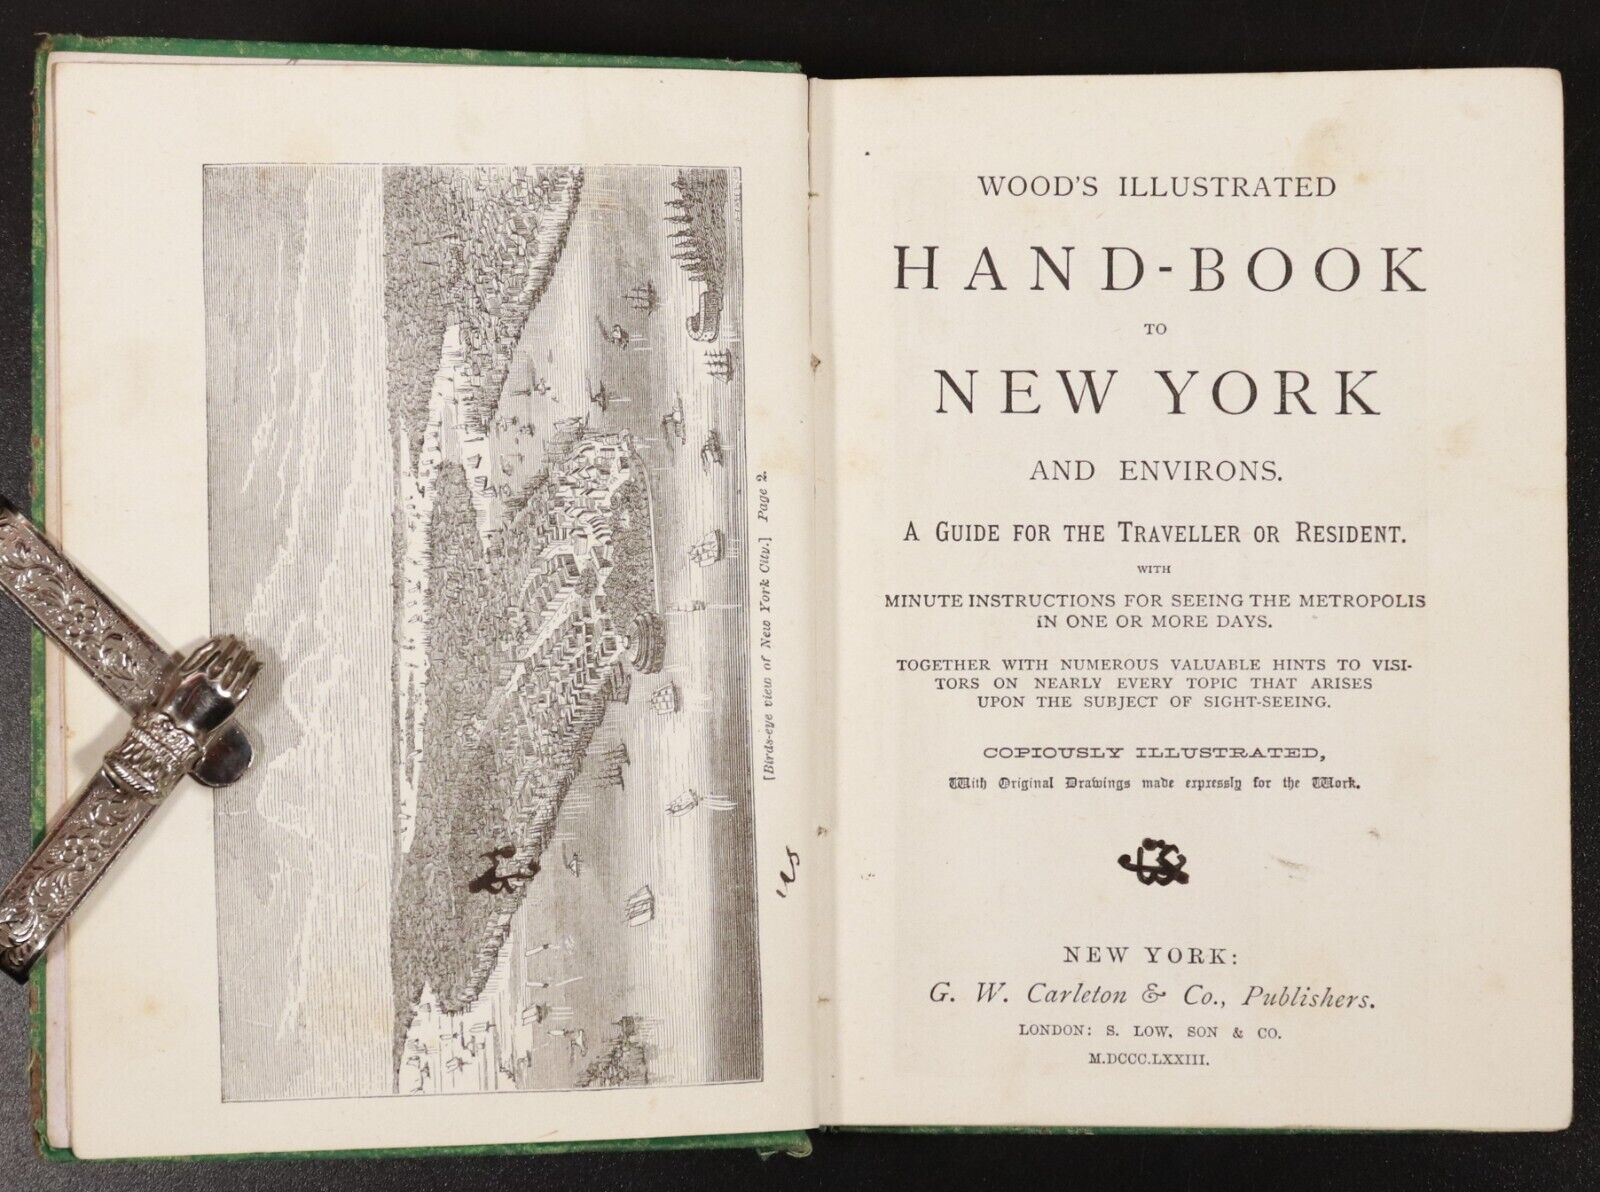 1873 Wood's Illustrated Hand-Book To New York Antiquarian Travel Guide